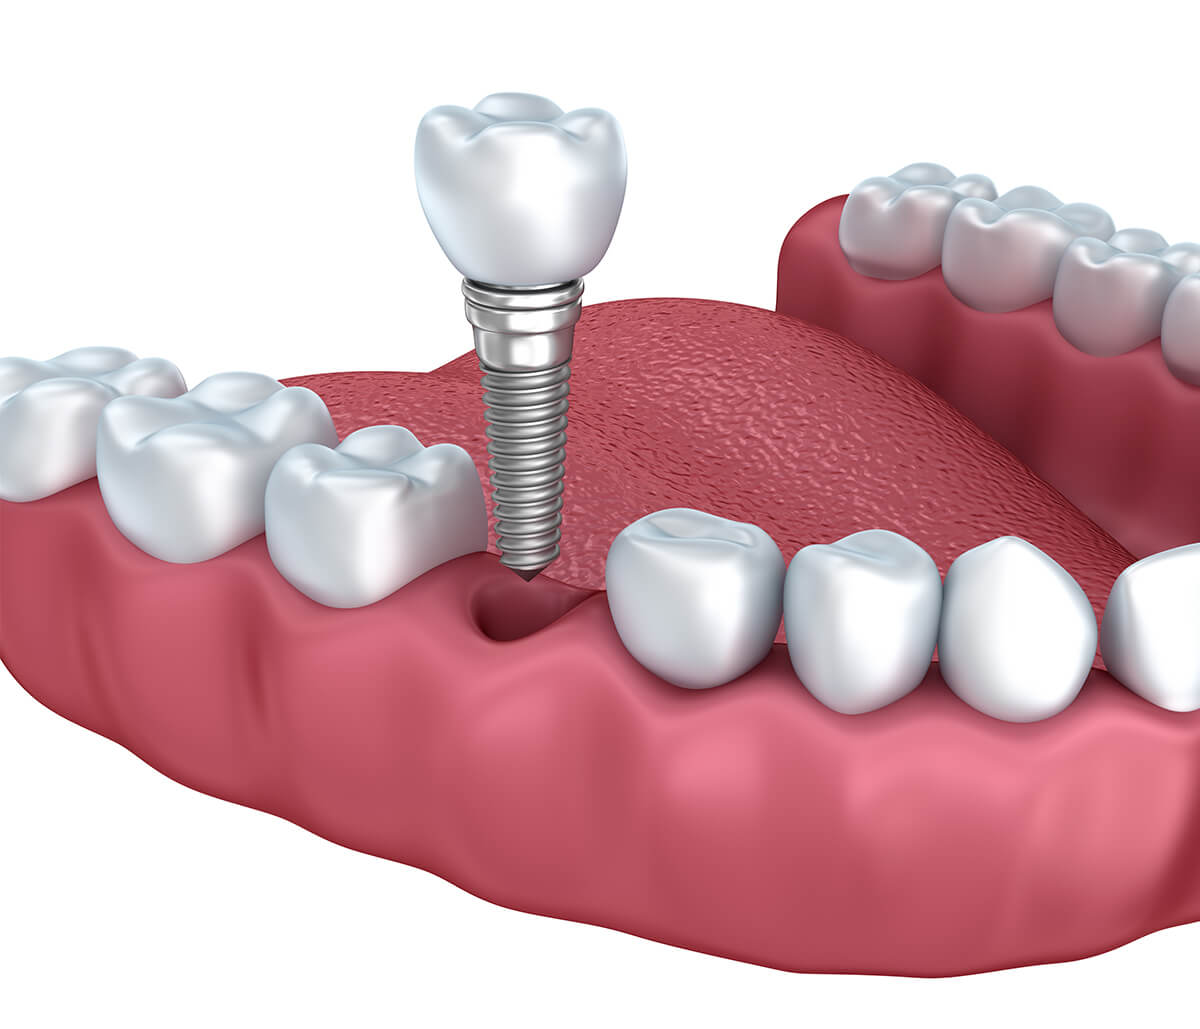 Restoring a lifetime of happy, healthy smiles with dental implant crowns, bridges, and dentures